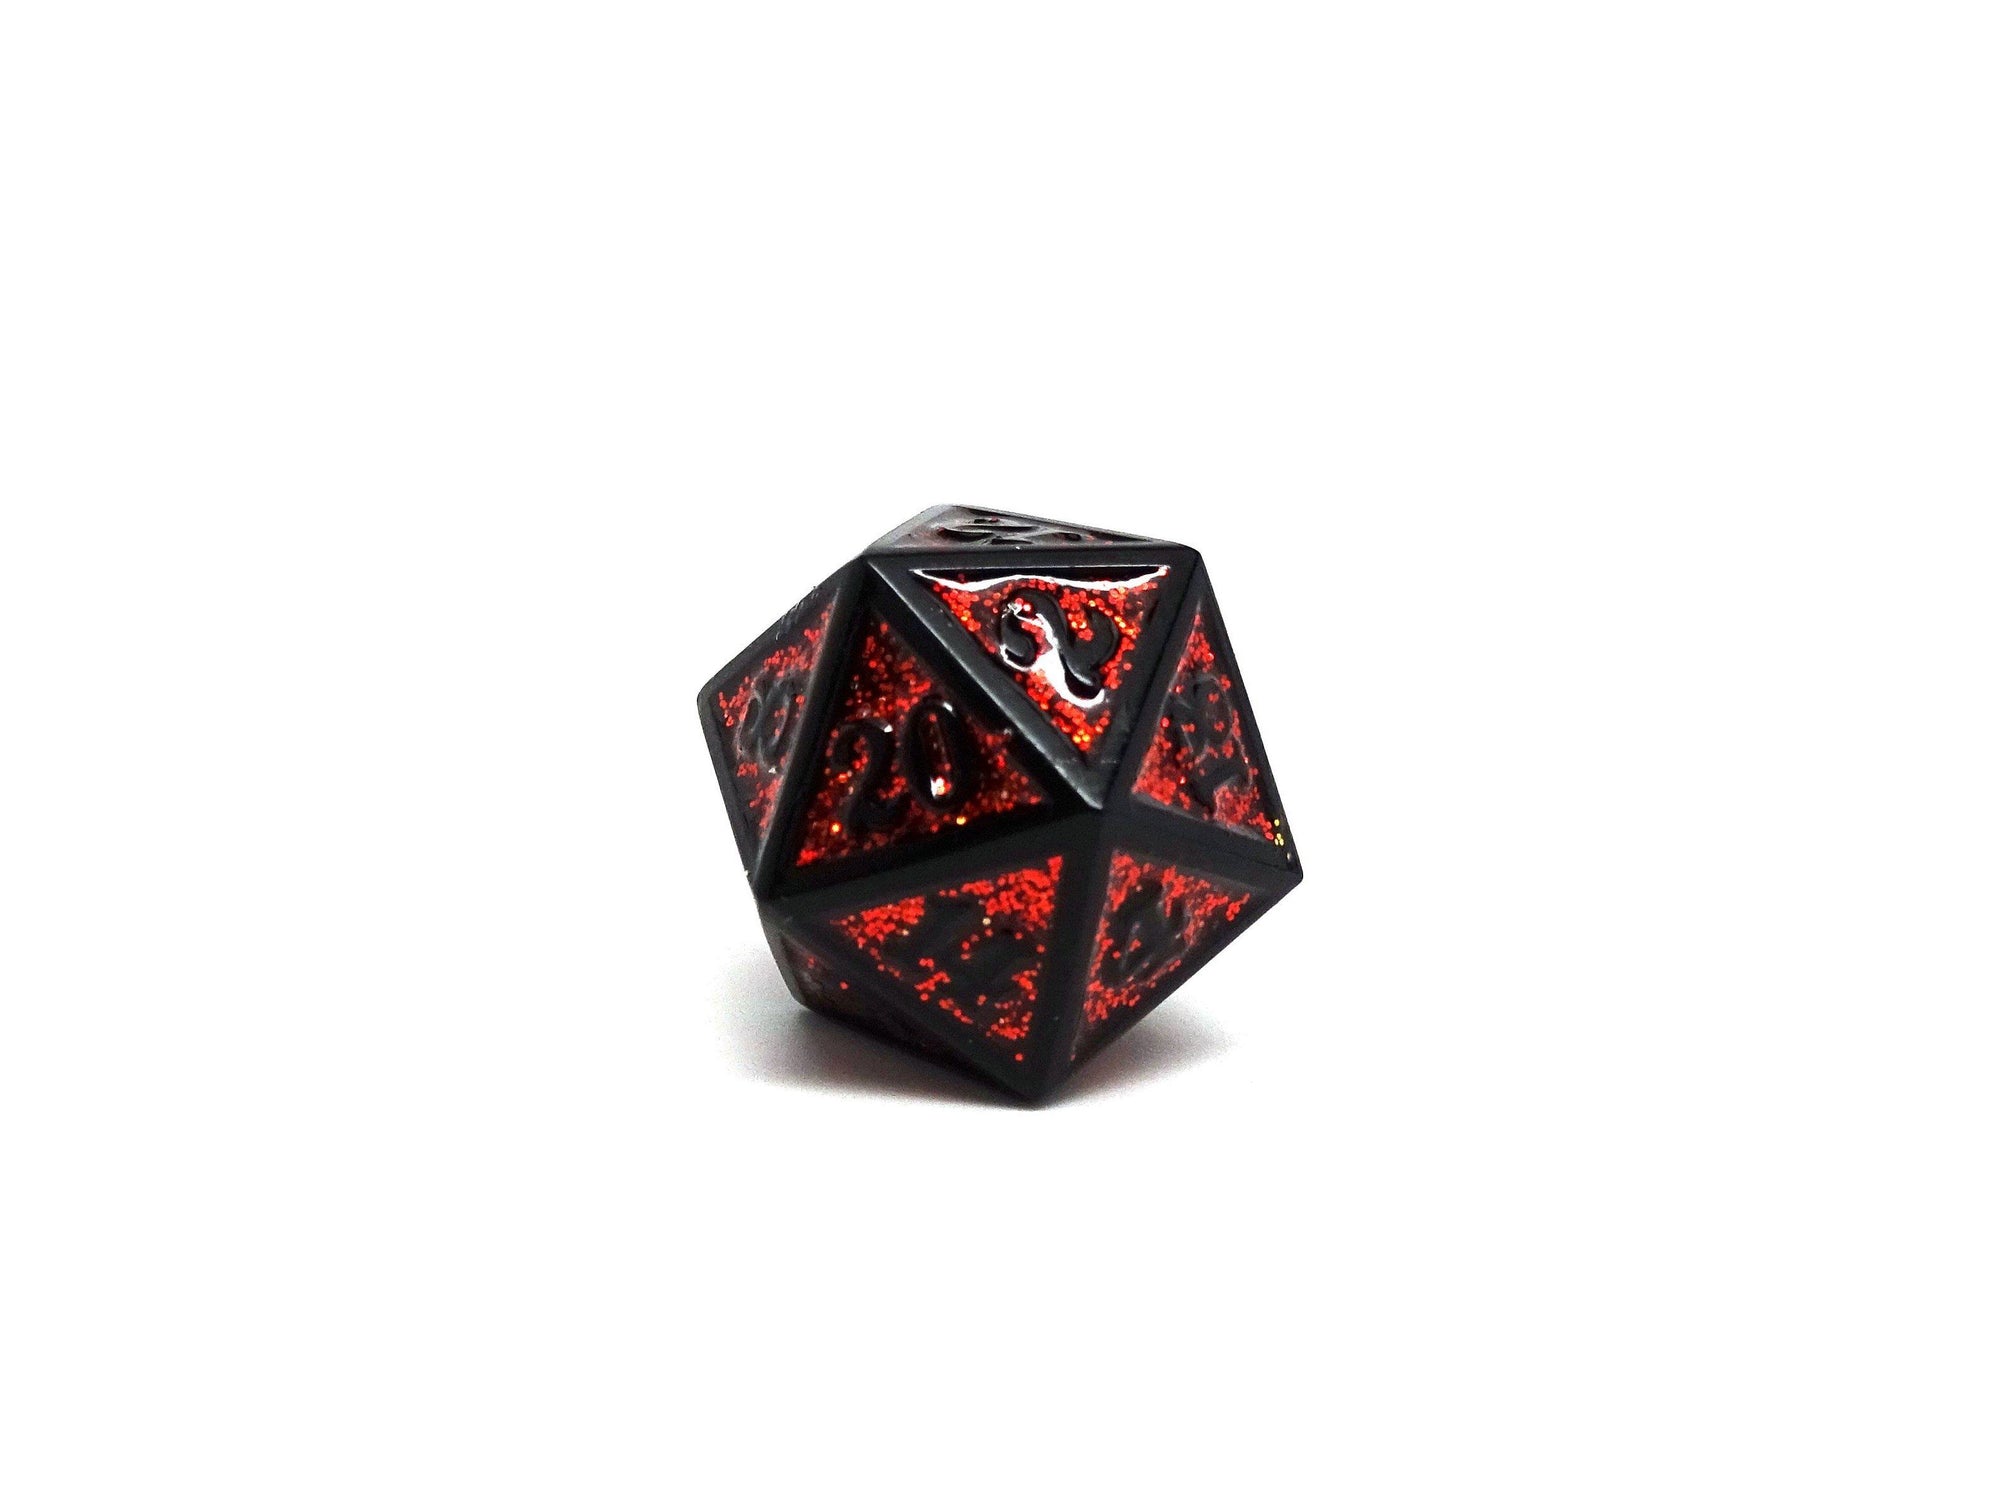 Heroic Dice of Metallic Luster - Single D20 Dice - Red with Black Font